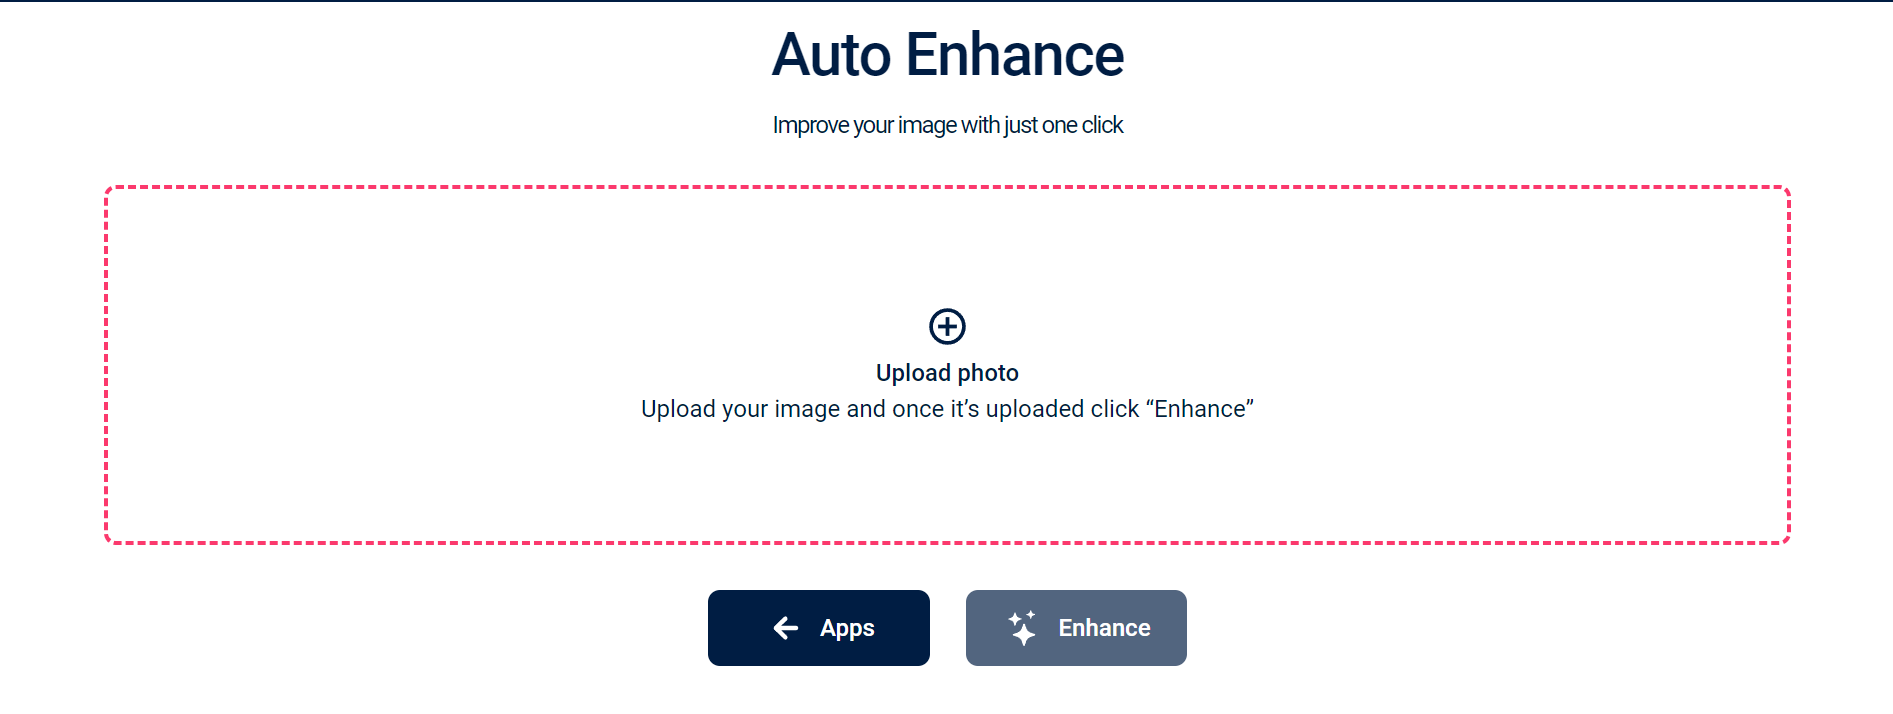 Ready-Made Preset "Auto Enhance" - Improve Images In Just 3 Clicks